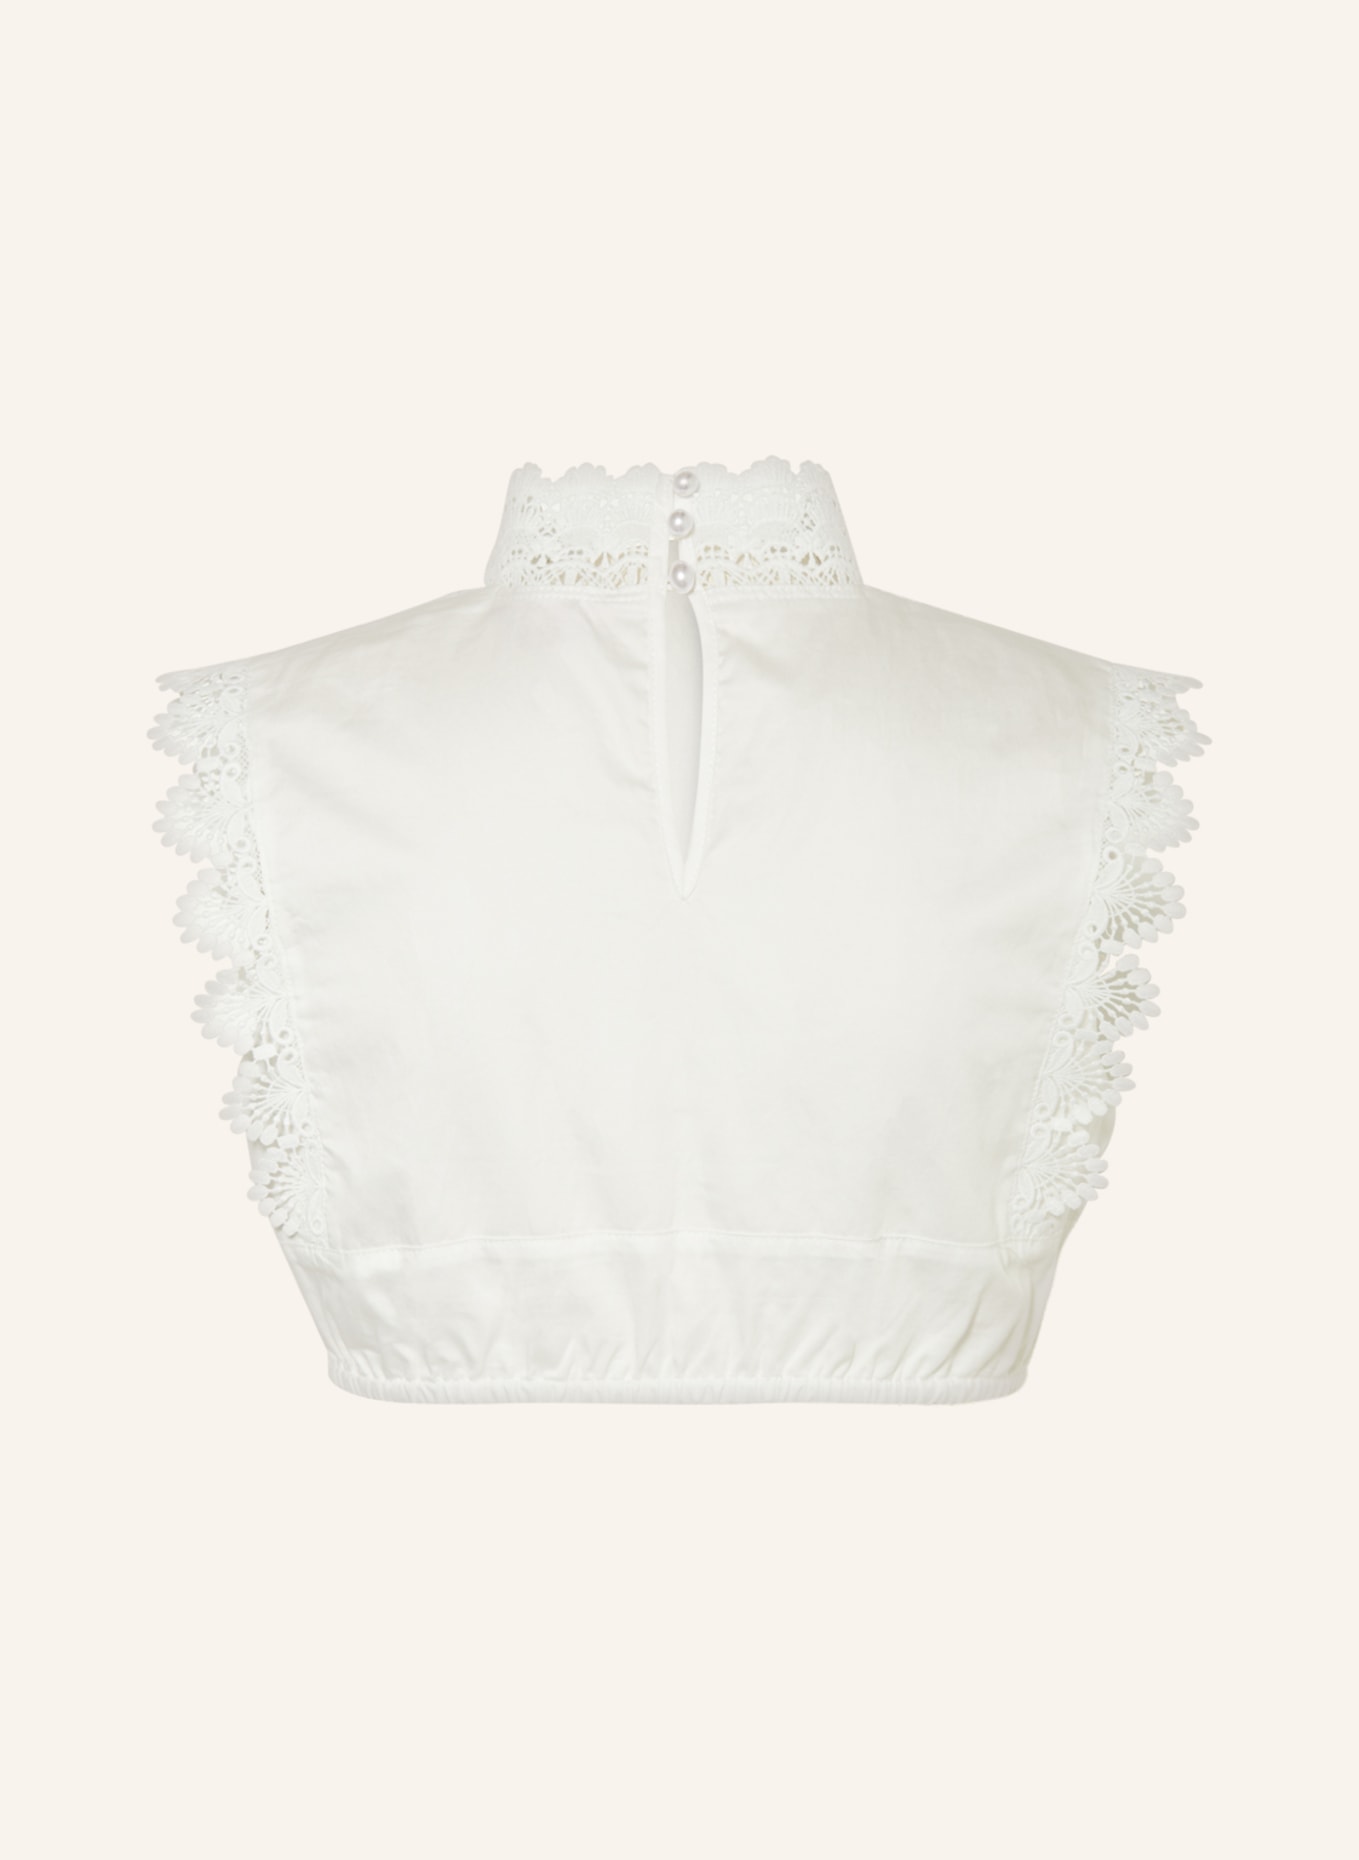 KRÜGER Dirndl blouse with broderie anglaise, Color: CREAM (Image 2)